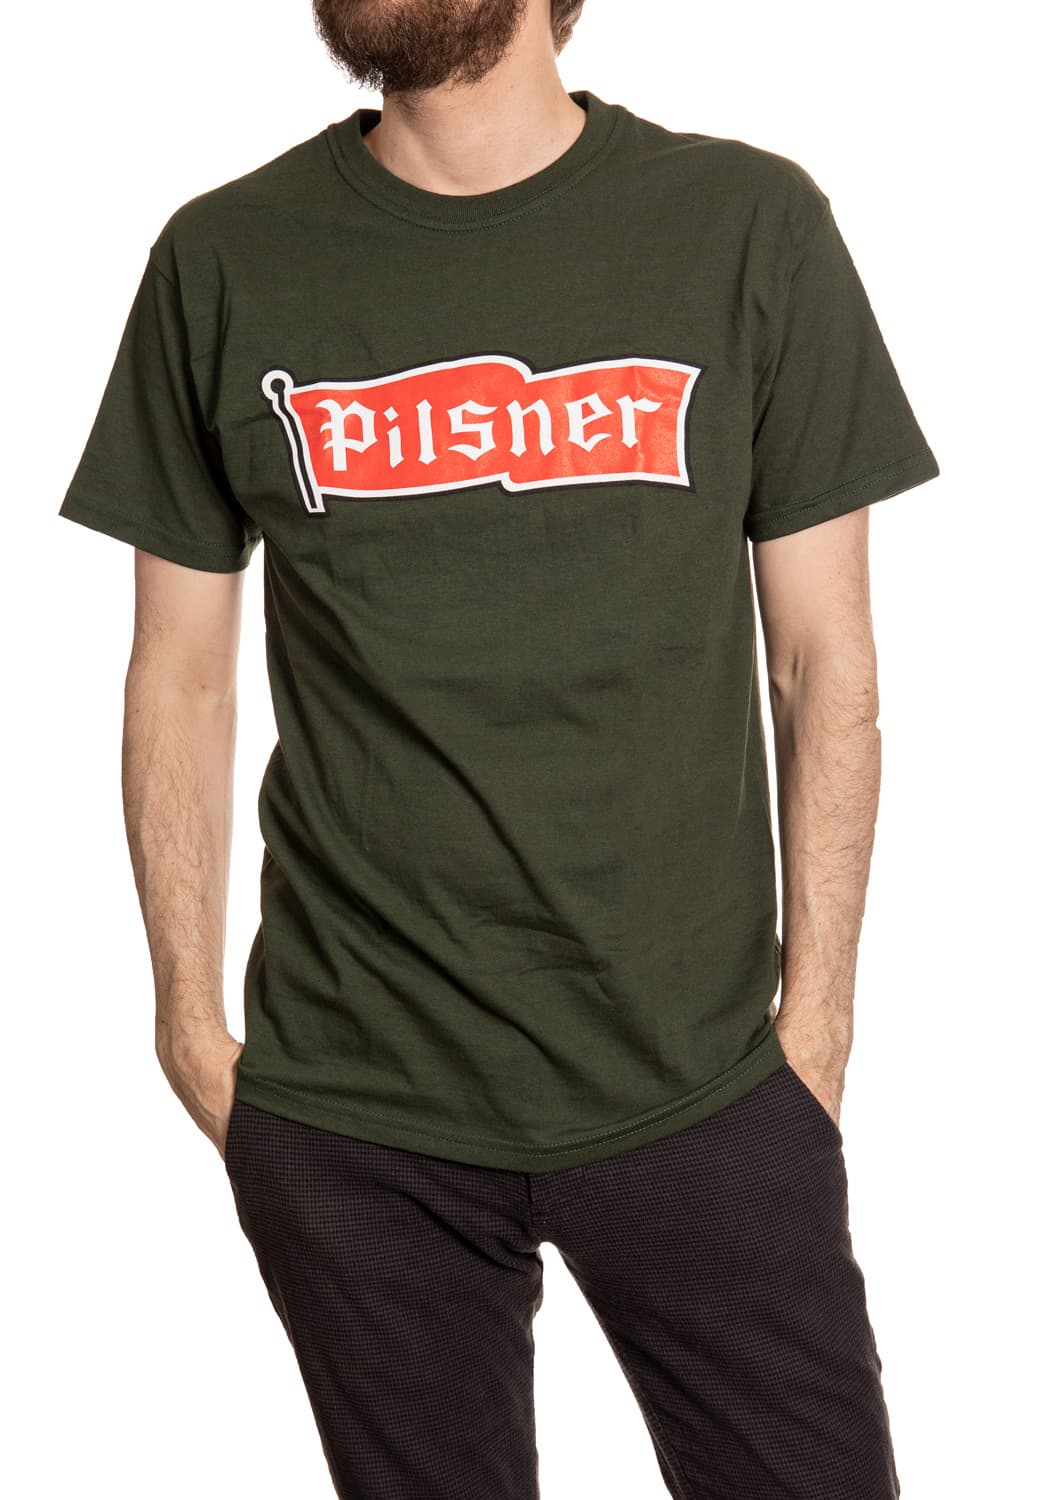 Style Pilsner Classic Logo T-Shirt on Green Shirt Front View